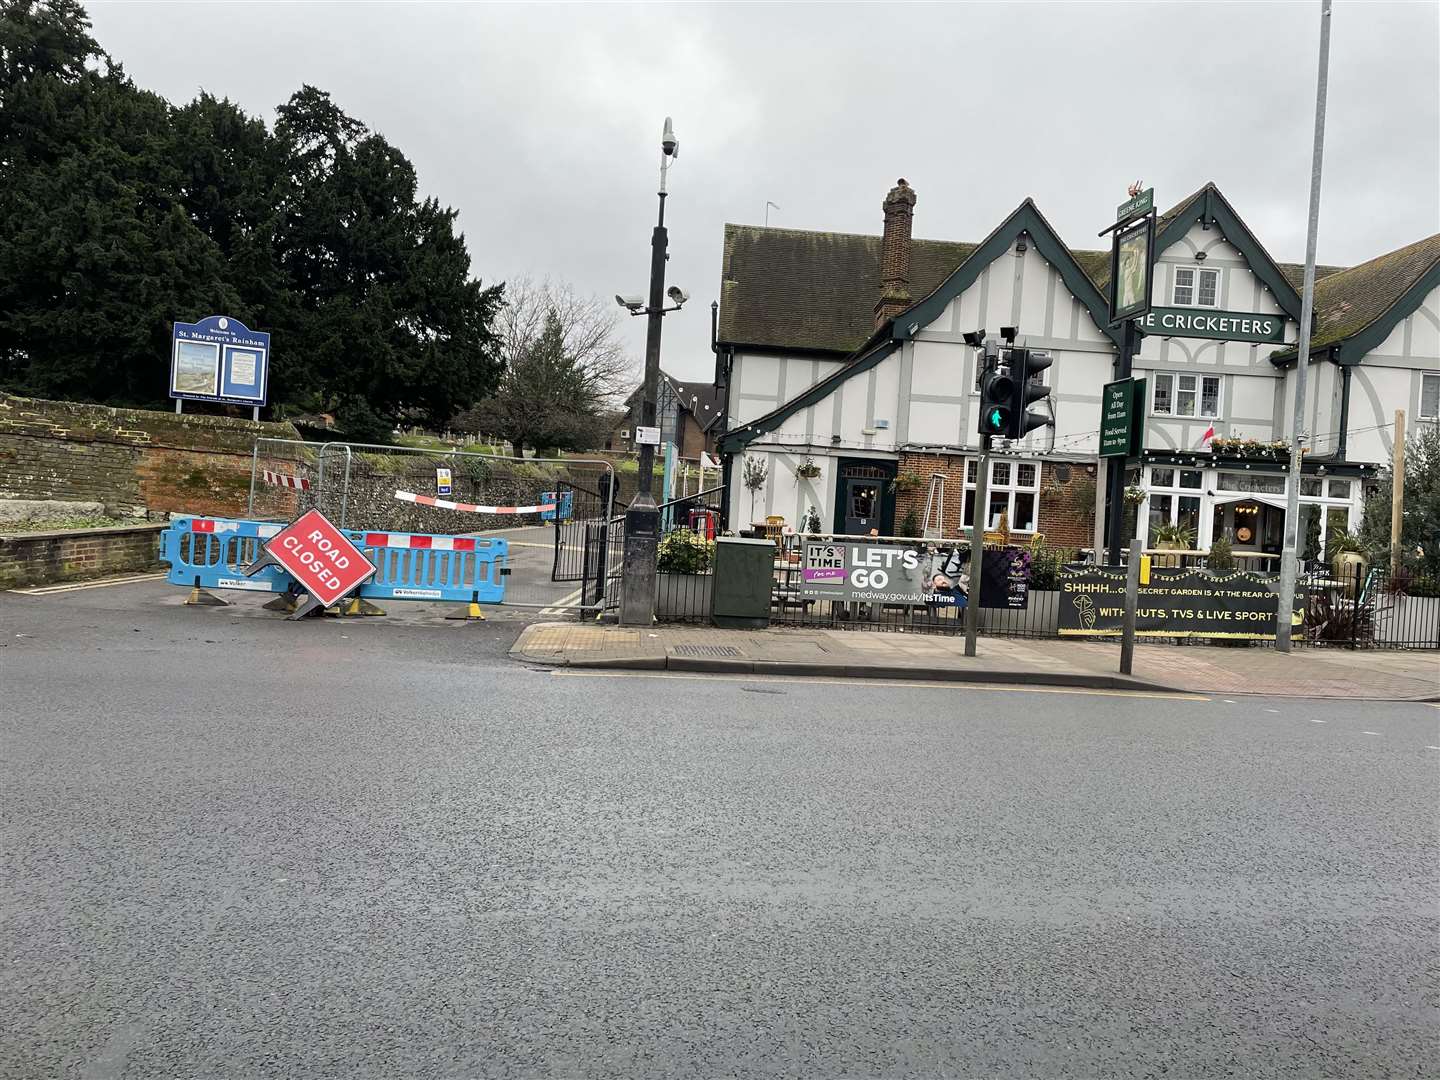 Road next to Cricketers pub is temporarily closed